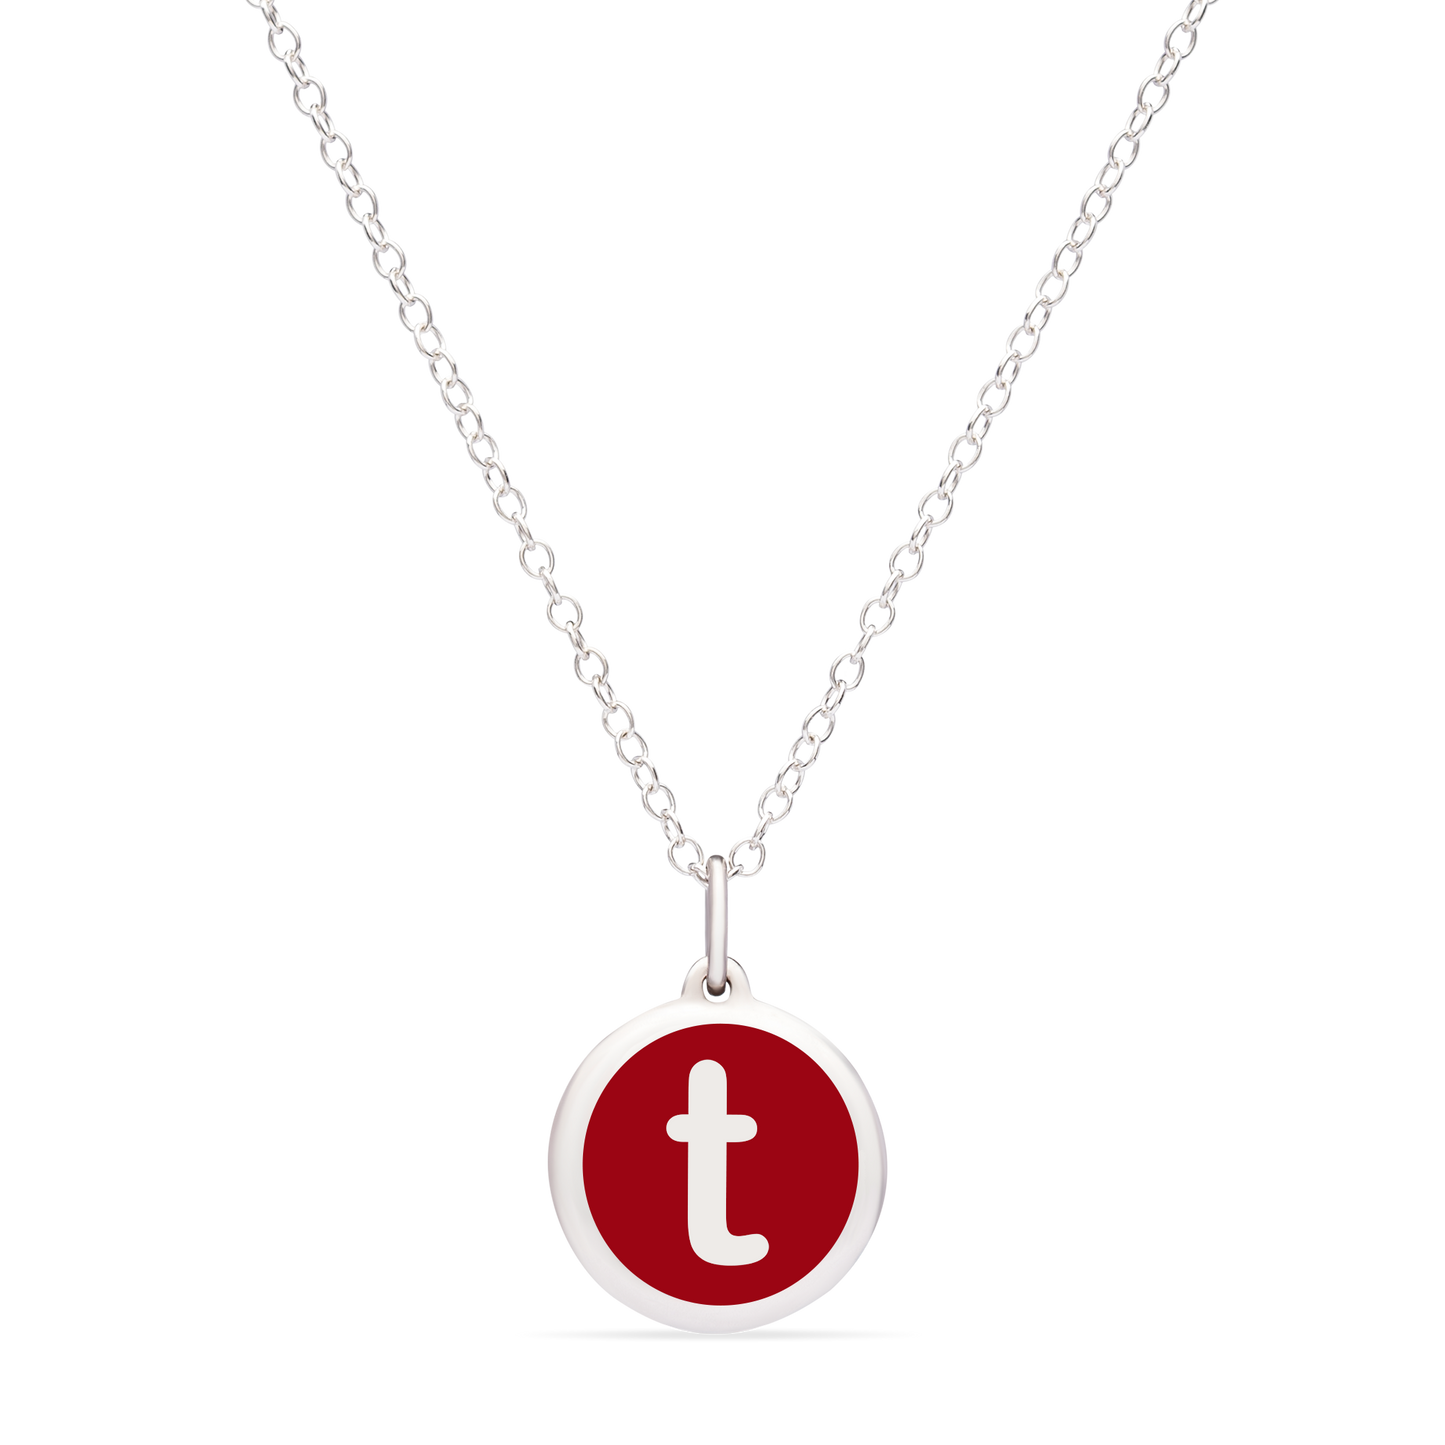 MINI INITIAL 't' CHARM sterling silver with rhodium plate